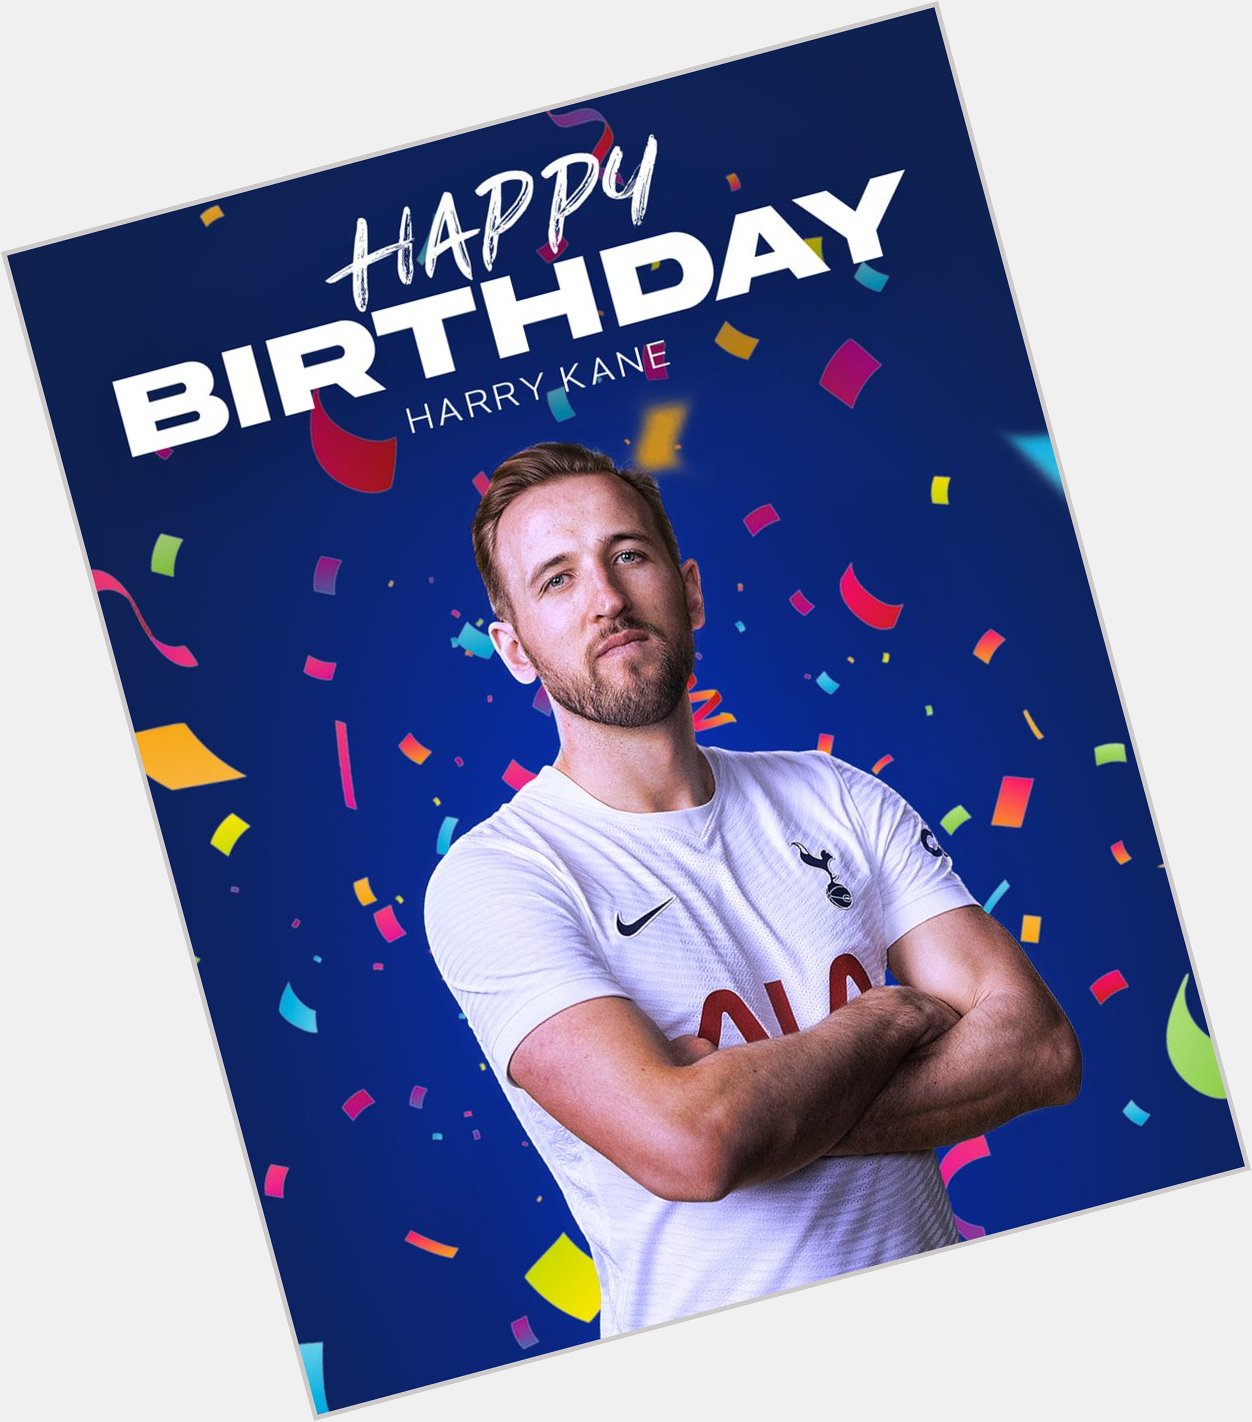 Happy birthday to the highest goalscorer in Premier League history to have never won the trophy. Harry Kane 